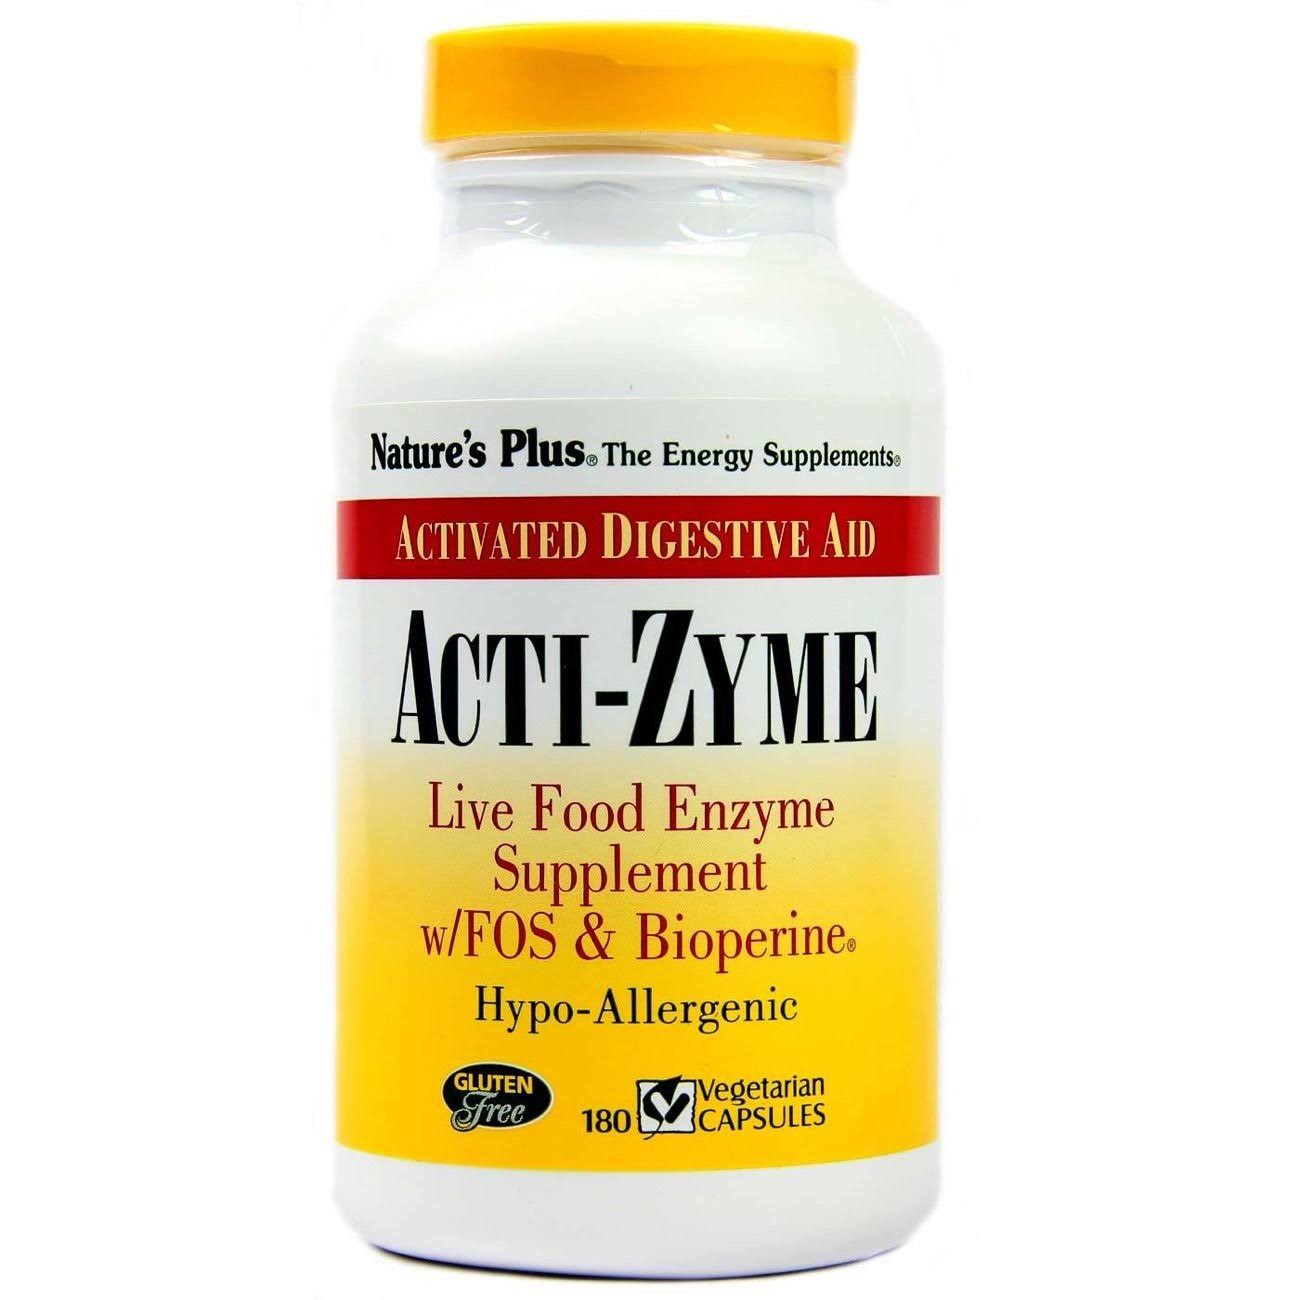 Nature's Plus Acti-Zyme Live Food Enzymes Supplement - 180 Vegetarian Capsules